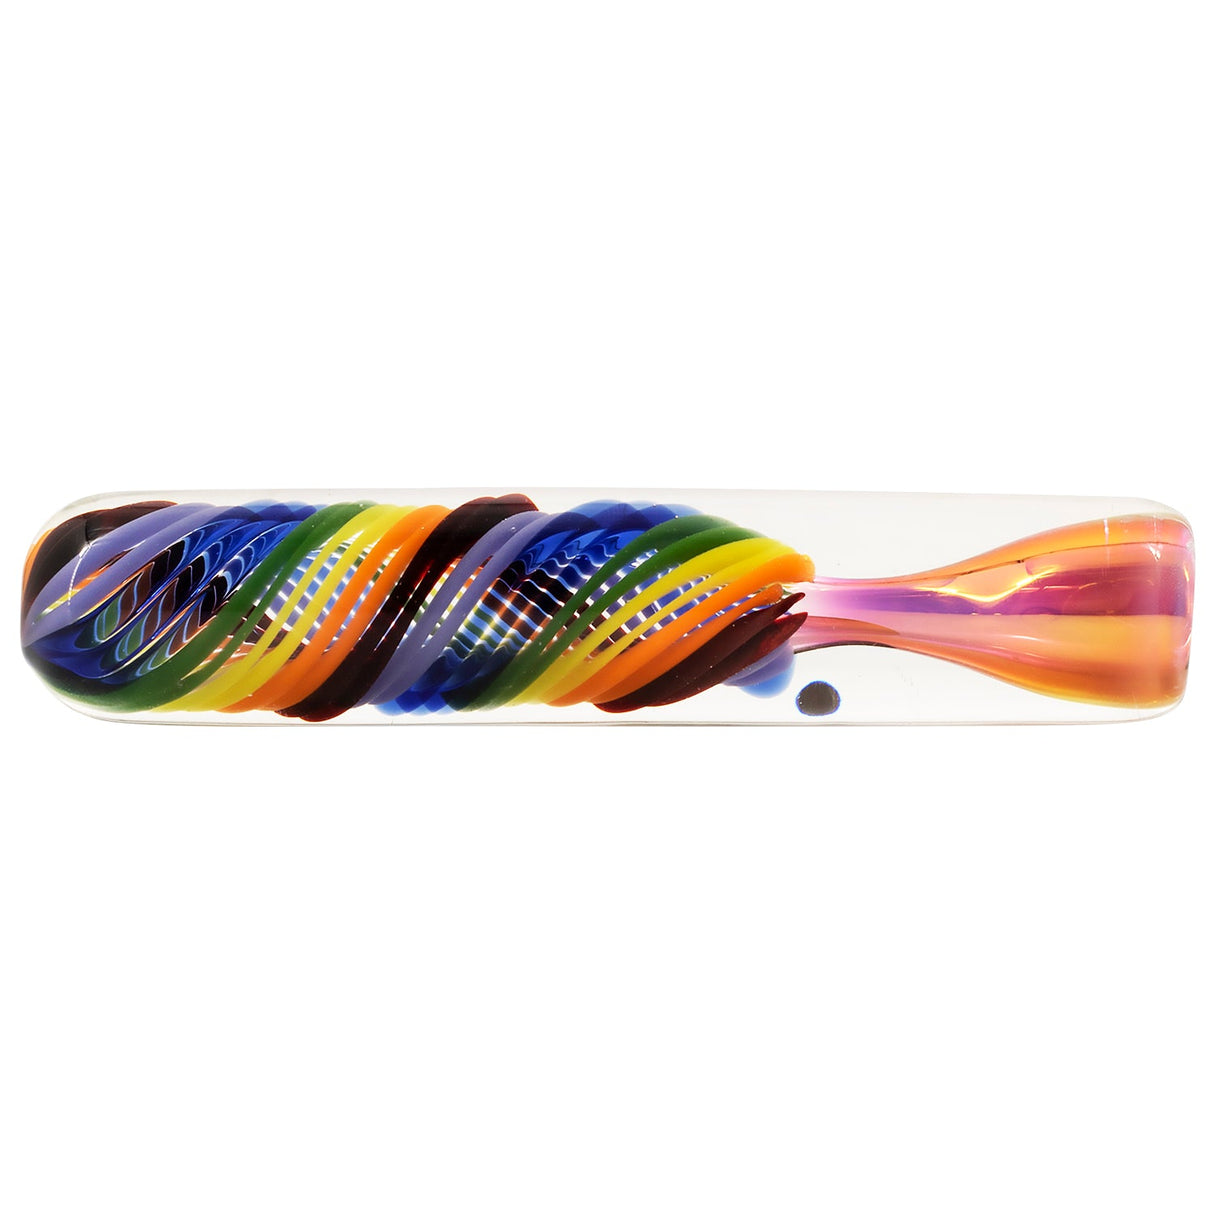 LA Pipes "Twisted Rainbow" Fumed Glass Chillum - 3.25" One-Hitter with Color Changing Design